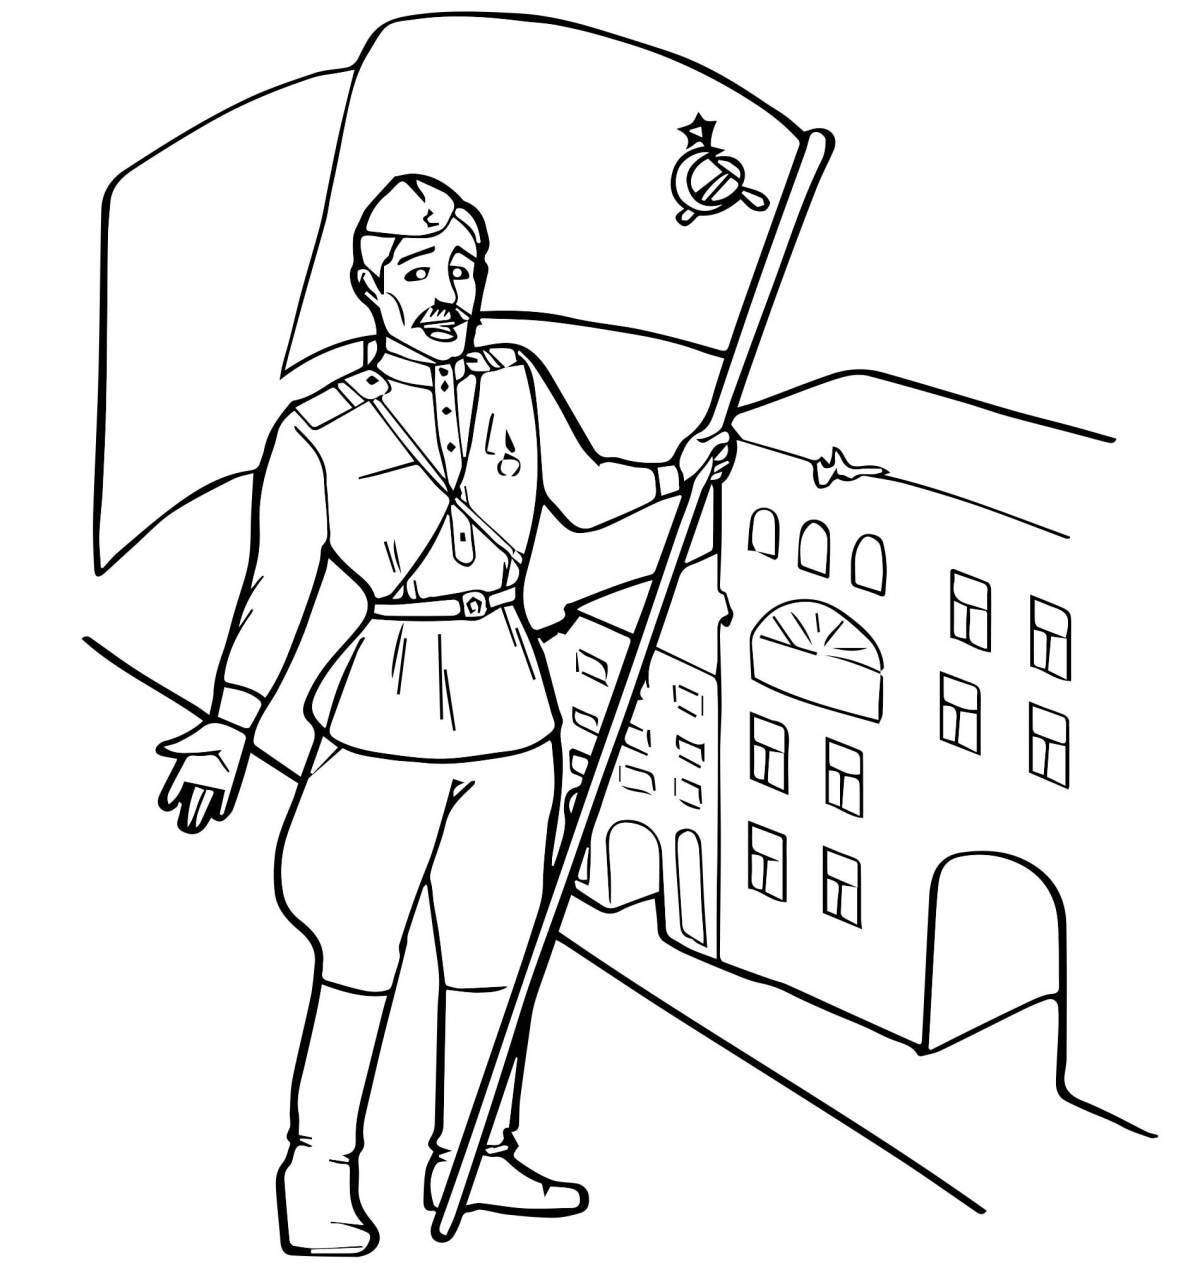 Cute soldier and children's coloring book